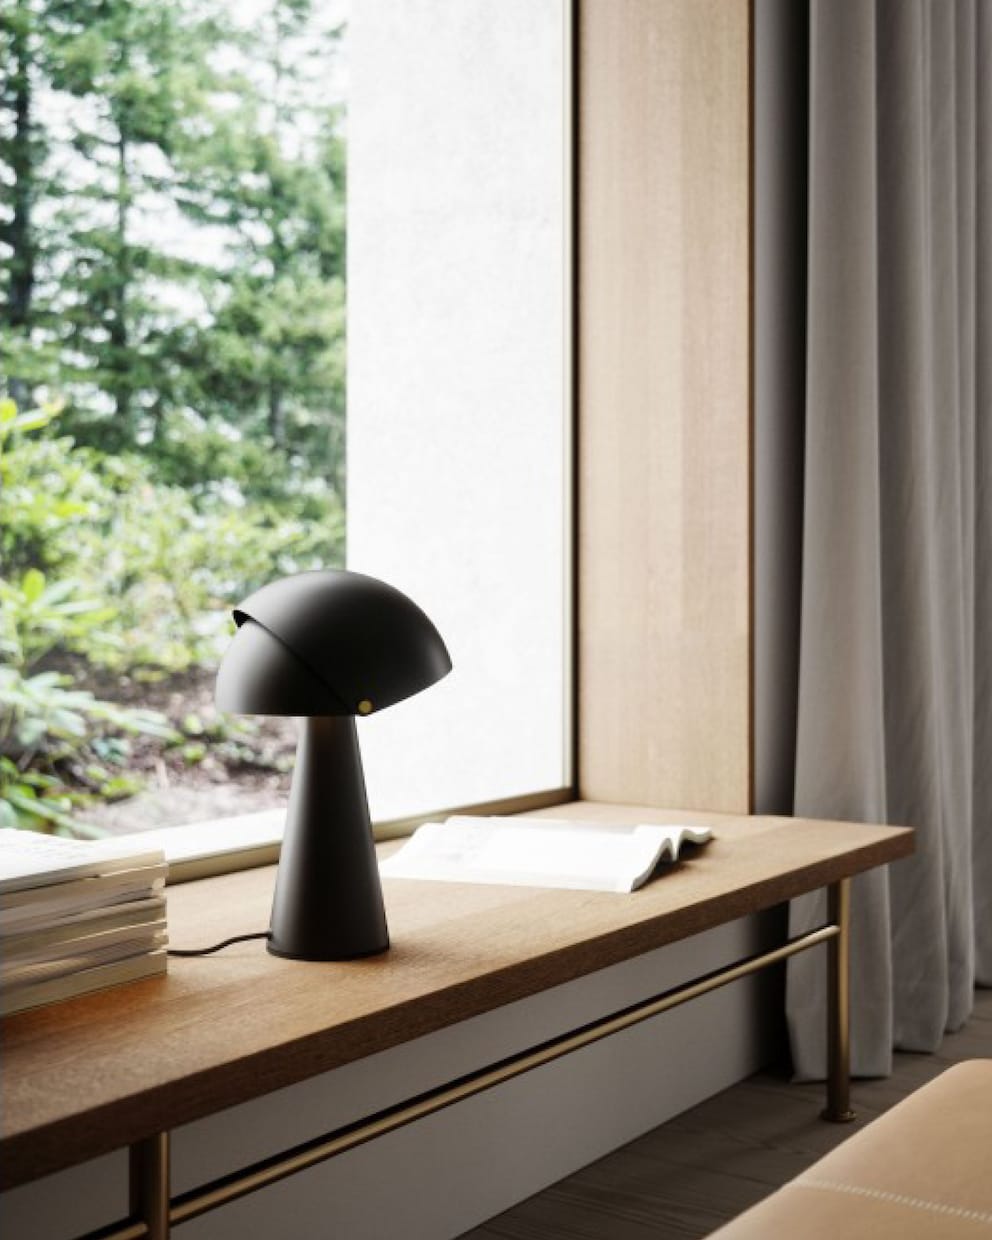 With its Scandinavian look, the designer piece «Align» resembles a conventional table lamp.